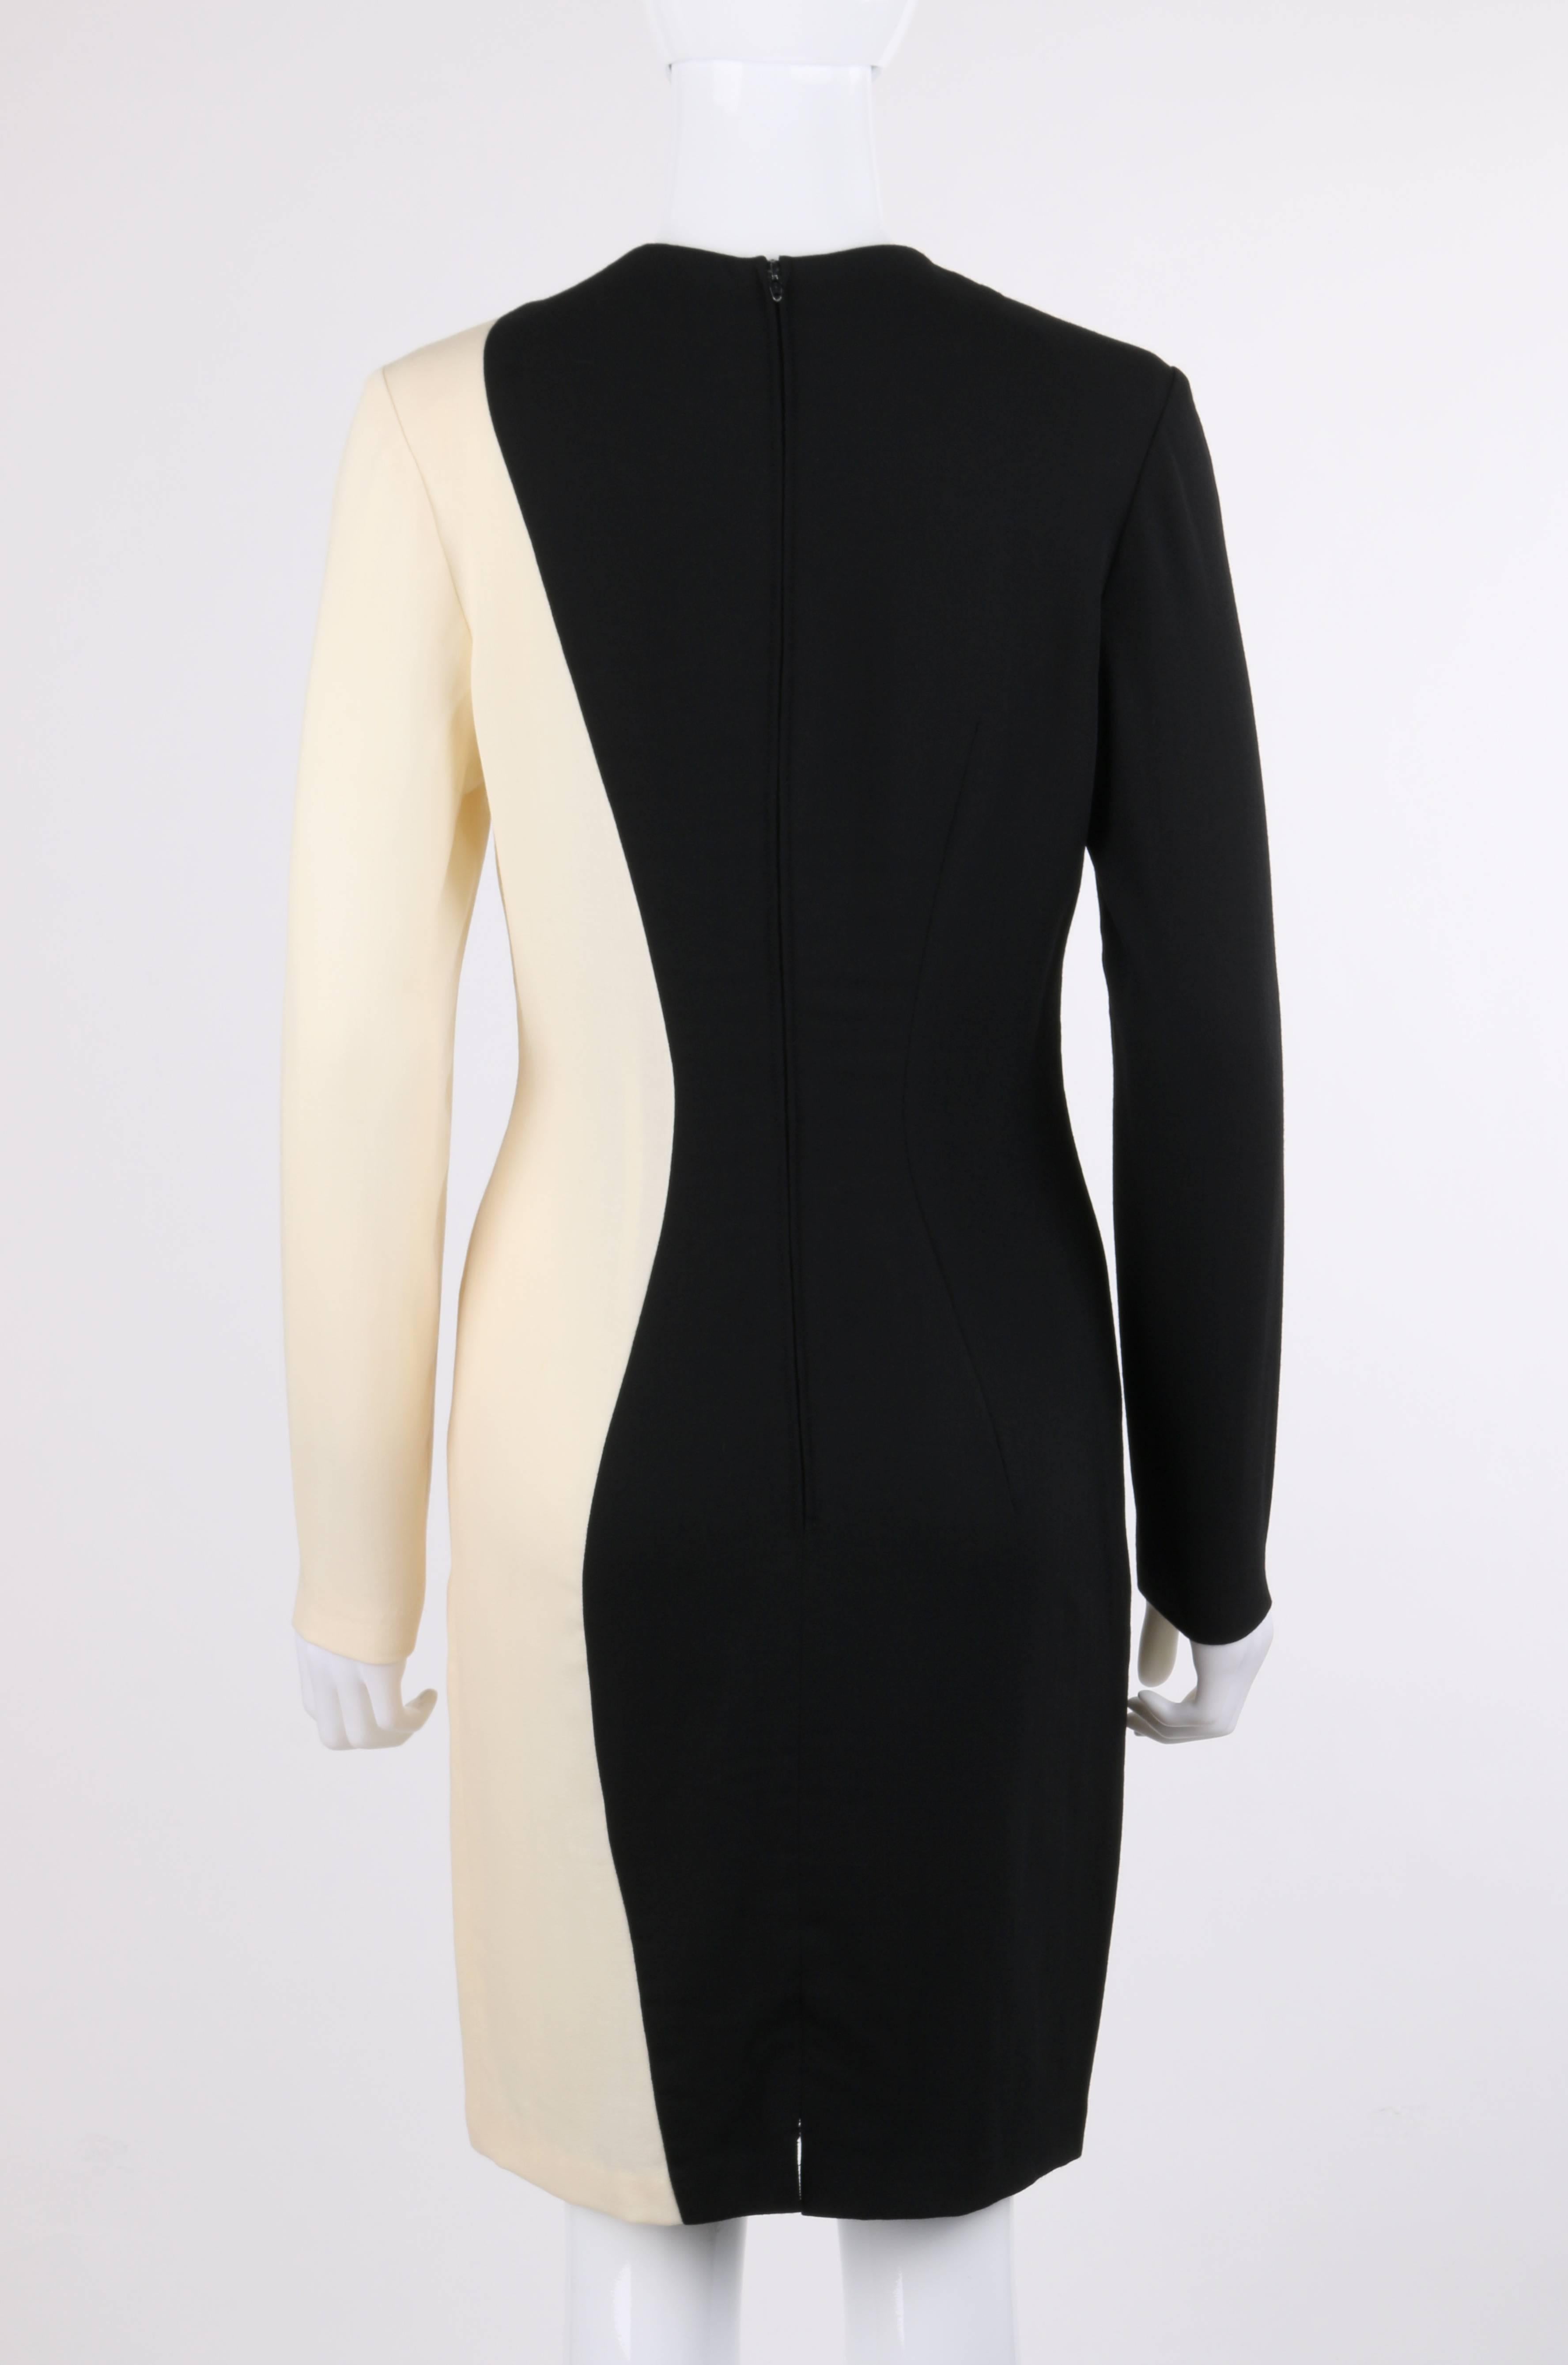 PIERRE CARDIN c.1980's Black & Ivory Color-Block Wool Long Sleeve Shift Dress In Good Condition For Sale In Thiensville, WI